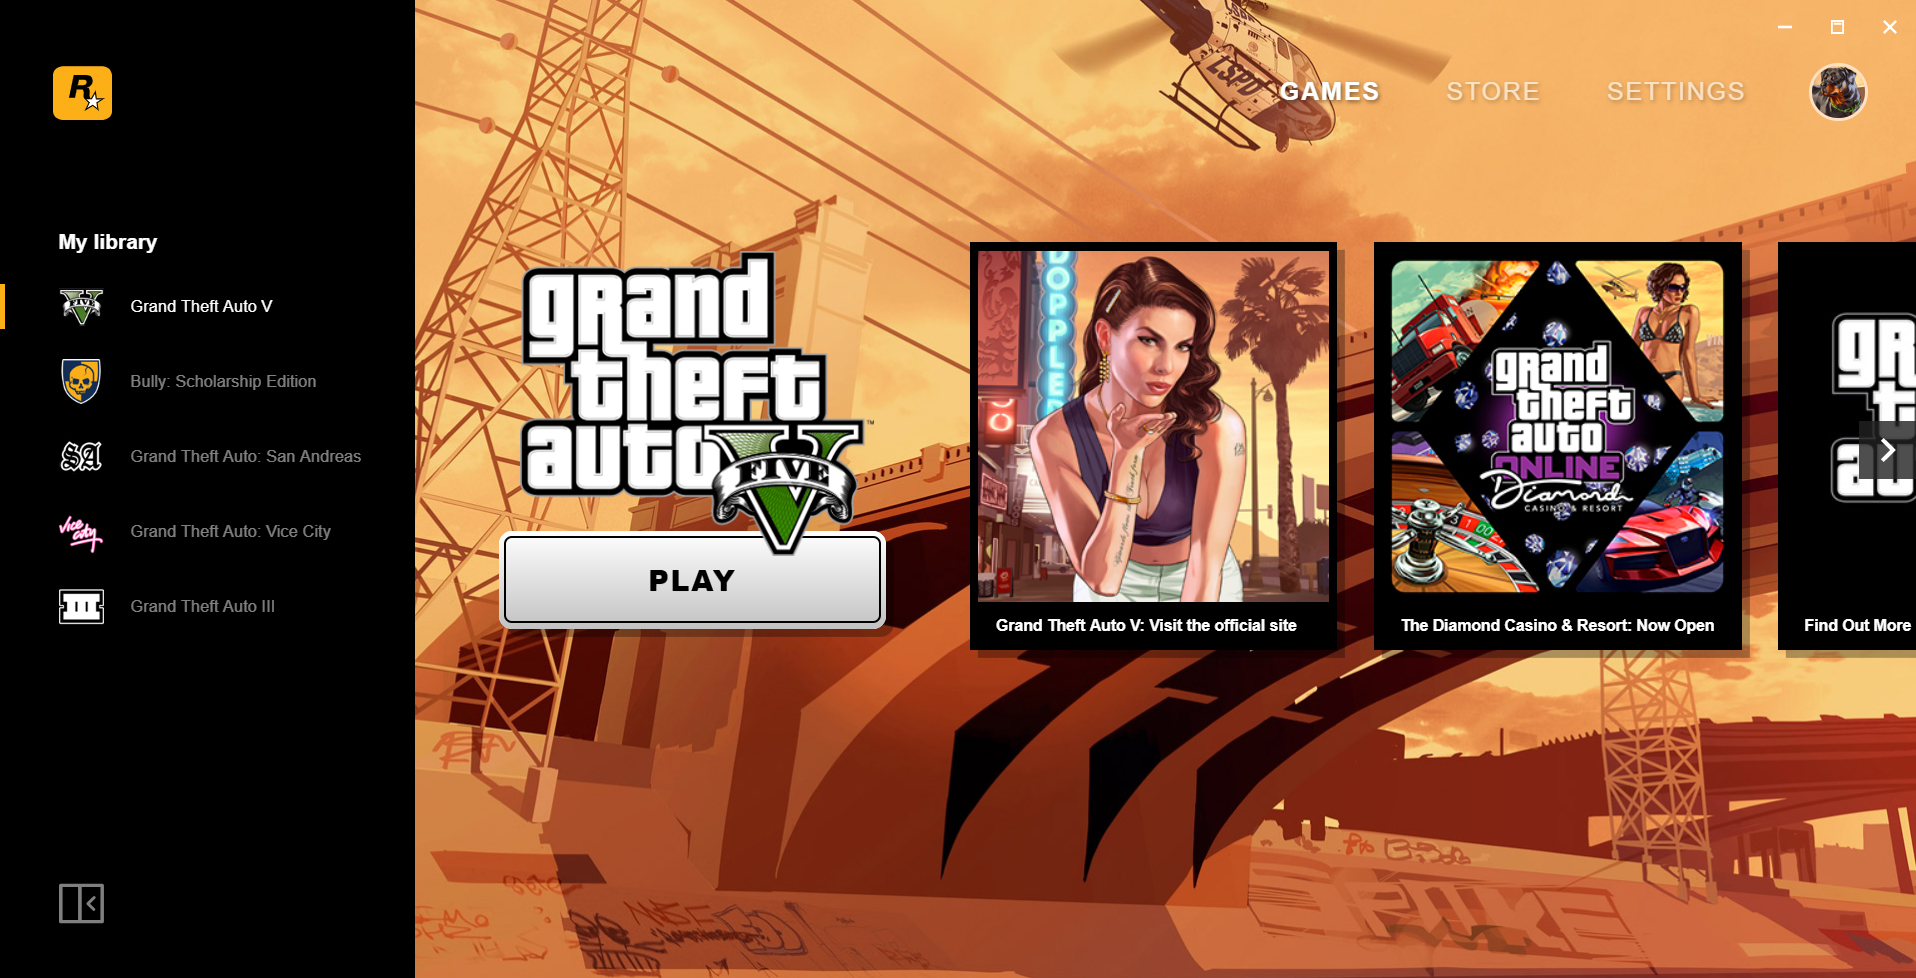 rockstar games launcher exited unexpectedly